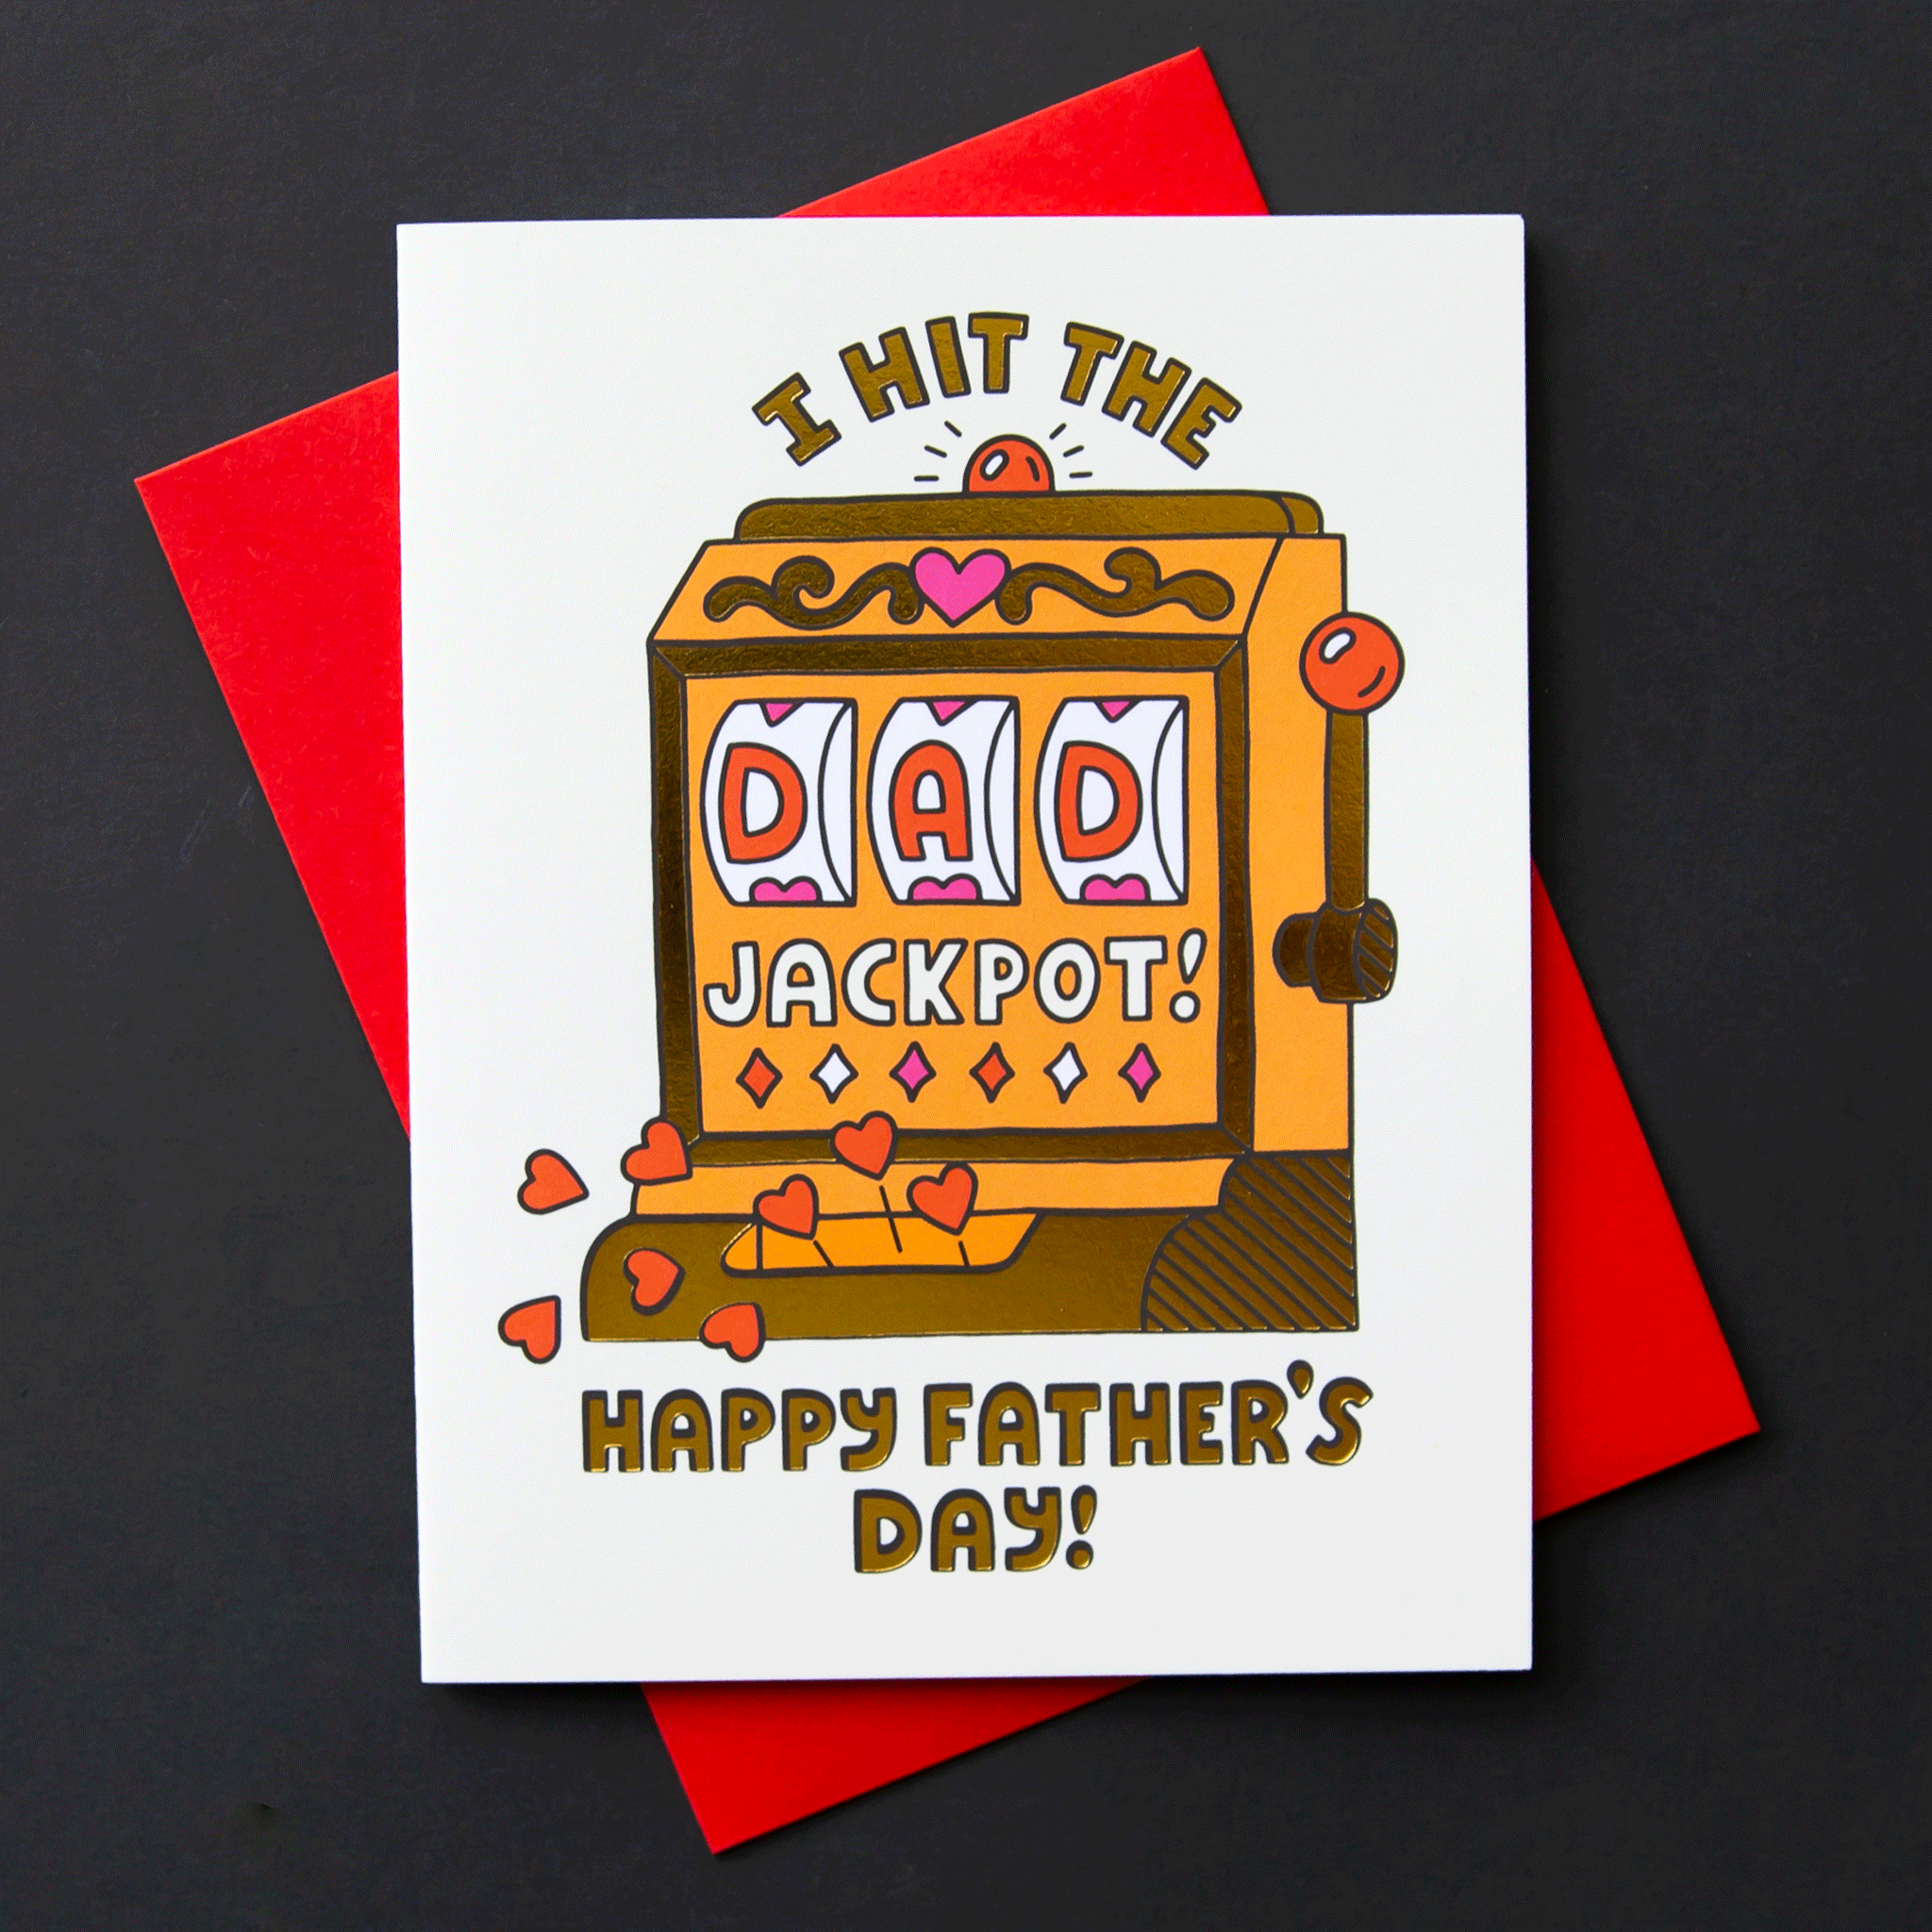 On a black background is a white card with an orange and gold slot machine that's detailed with hearts and reads, "I hit the DAD jackpot! Happy Father's Day!". "DAD" is written in the slot machine as the winning numbers. Also included is a coordinating white envelope.